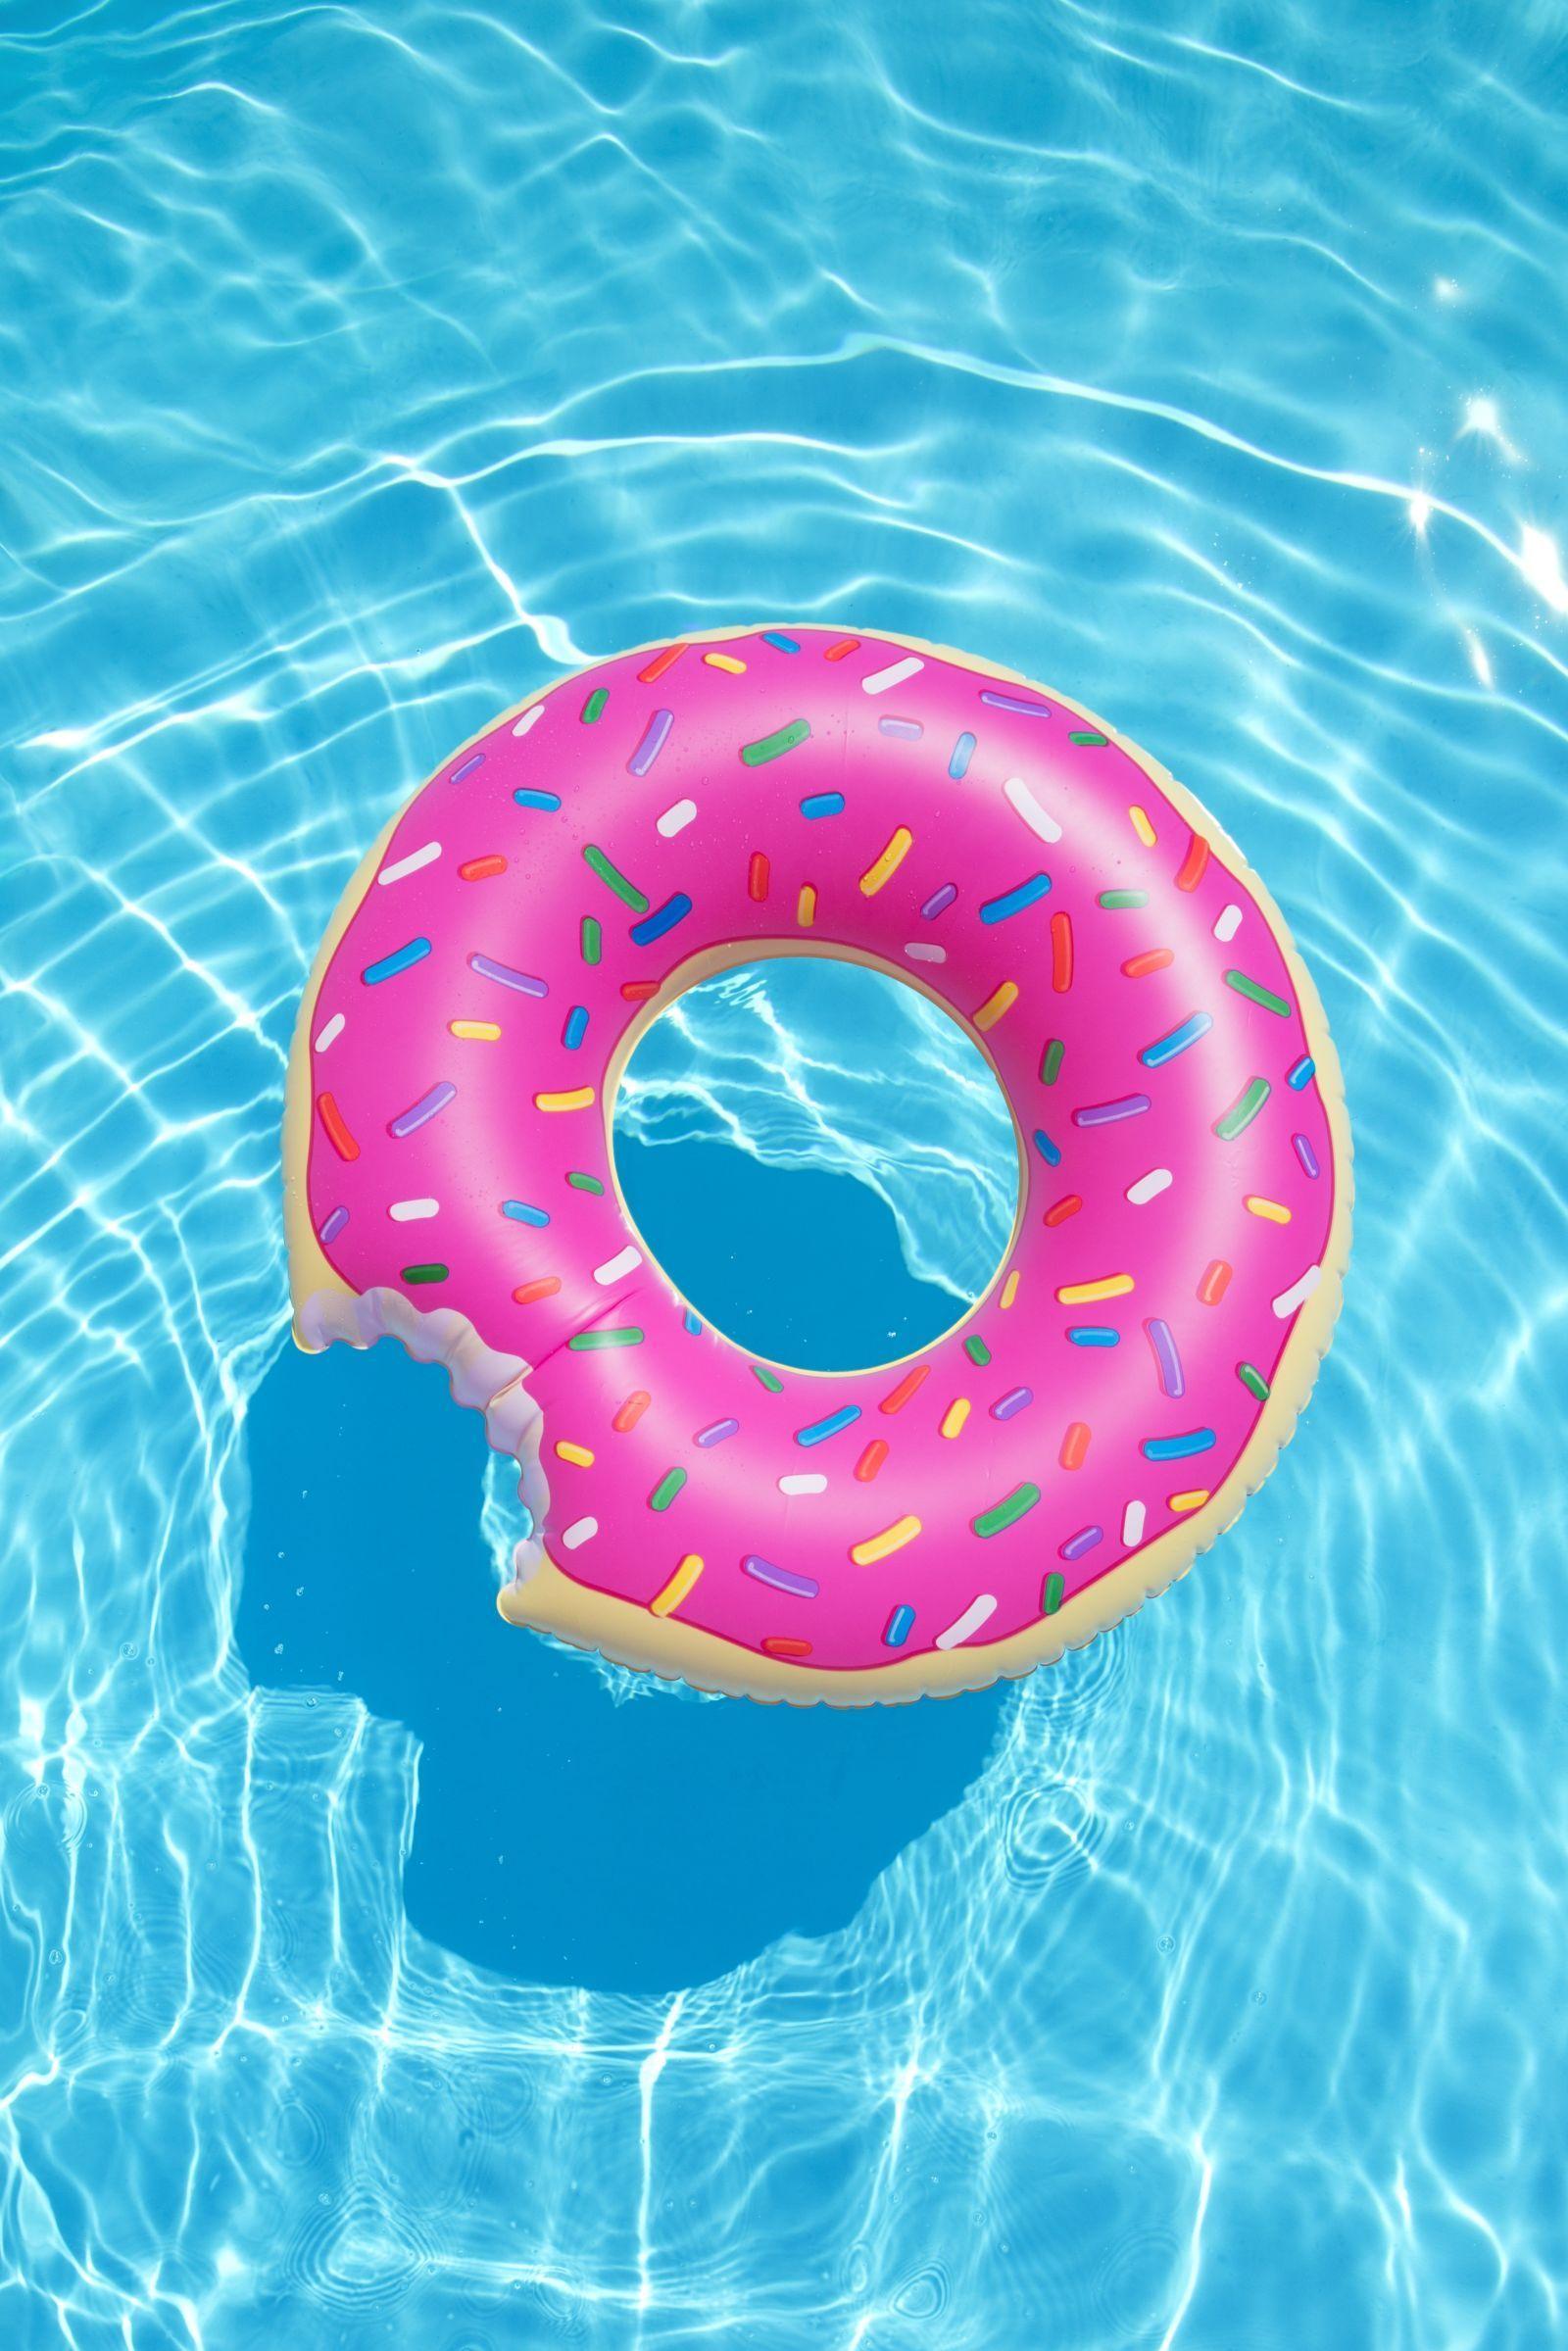 Awesome Pool Floats Every Food Lover Should Own. Shopping & Style